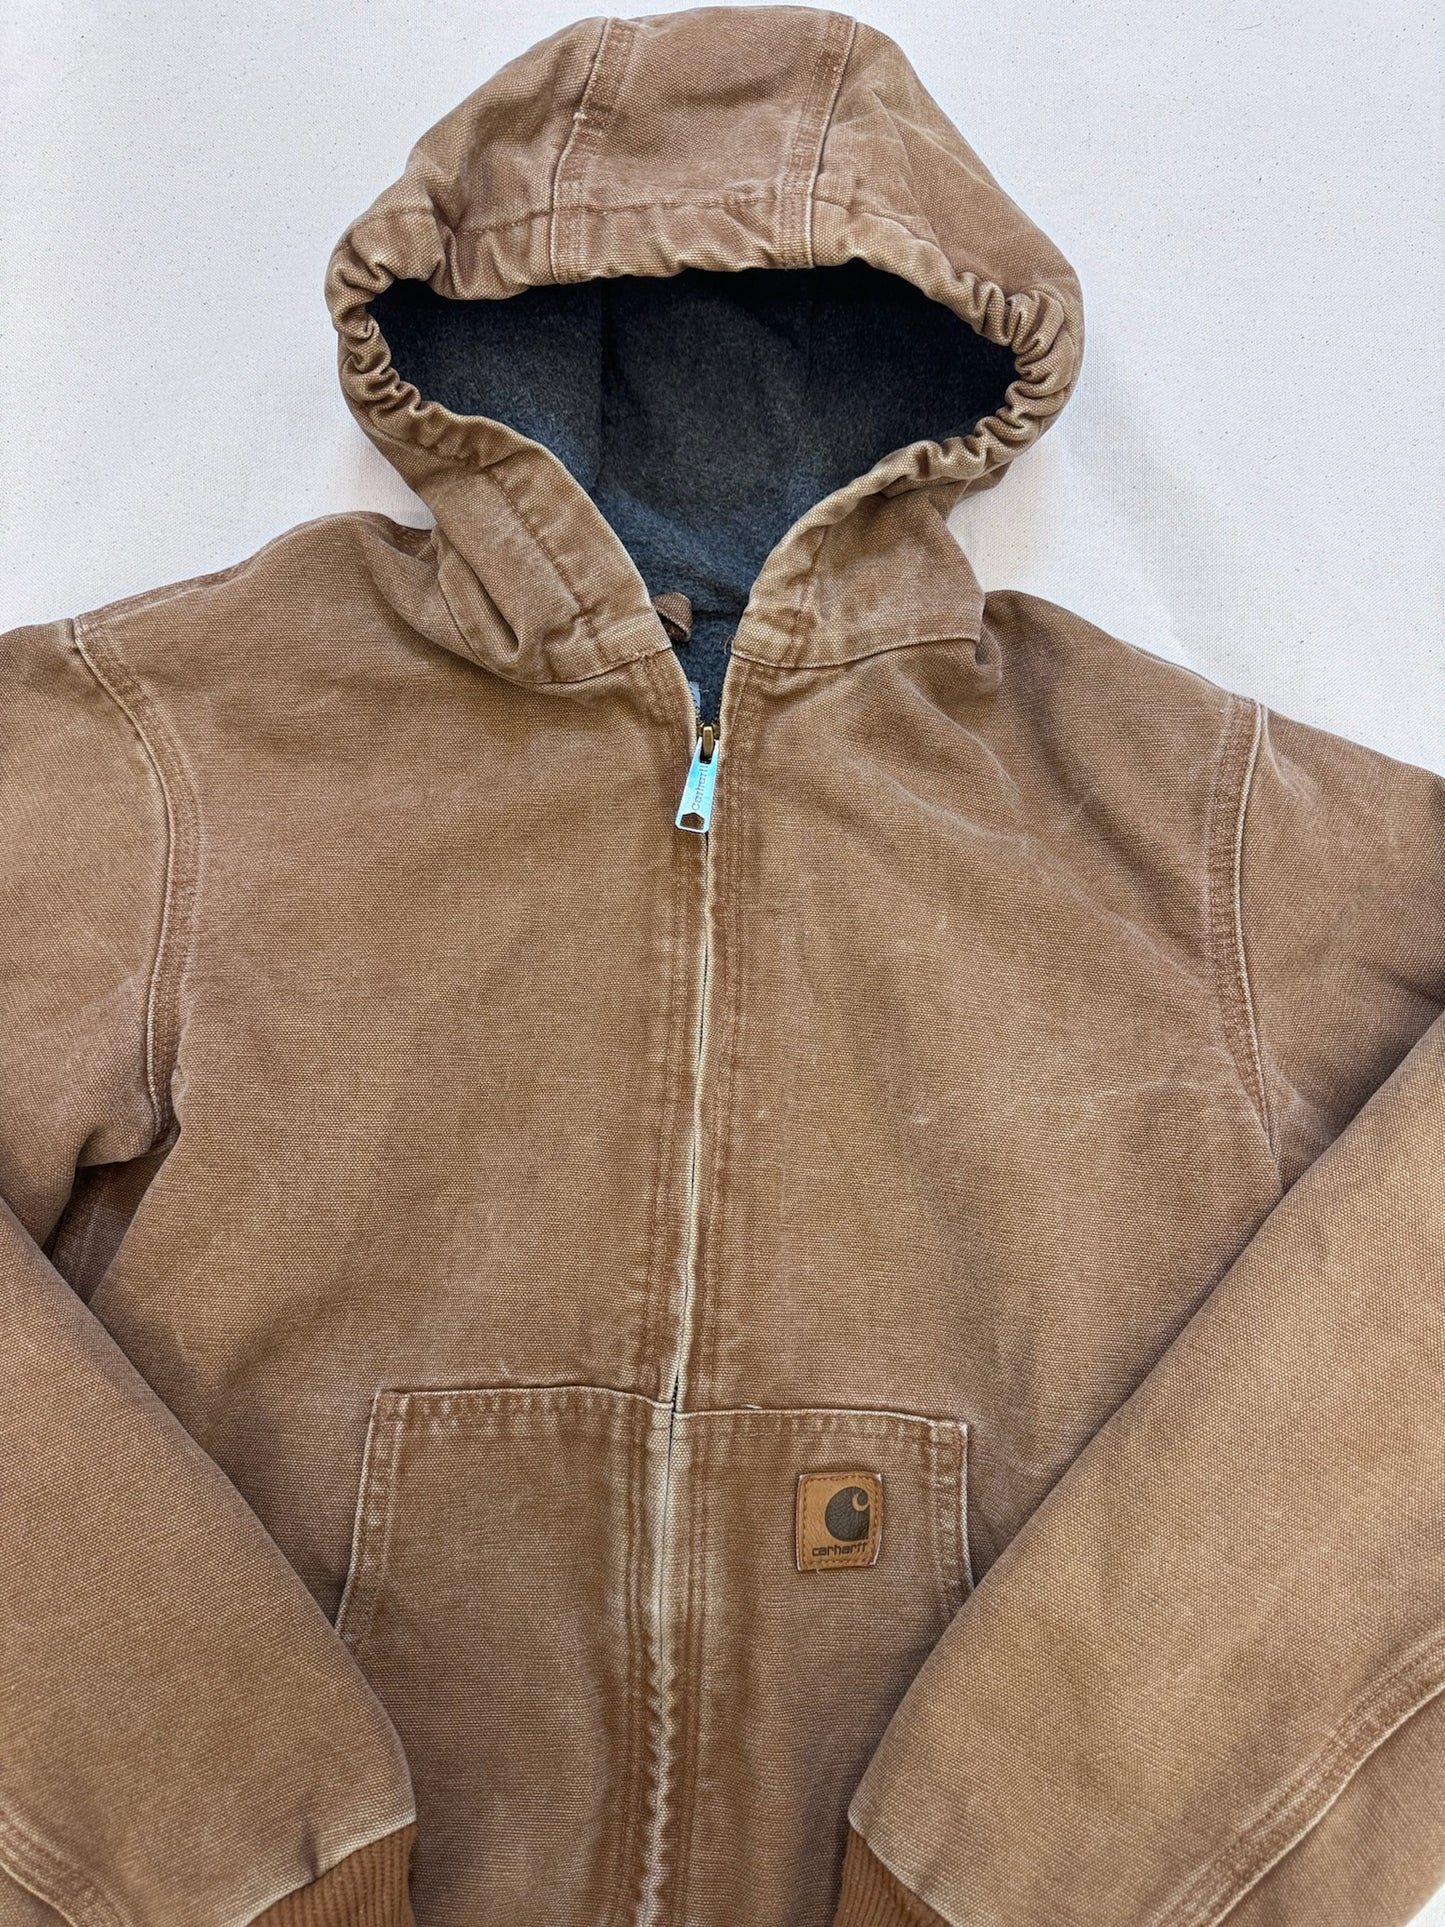 Vintage Carhartt Hooded Jacket Size Youth XL